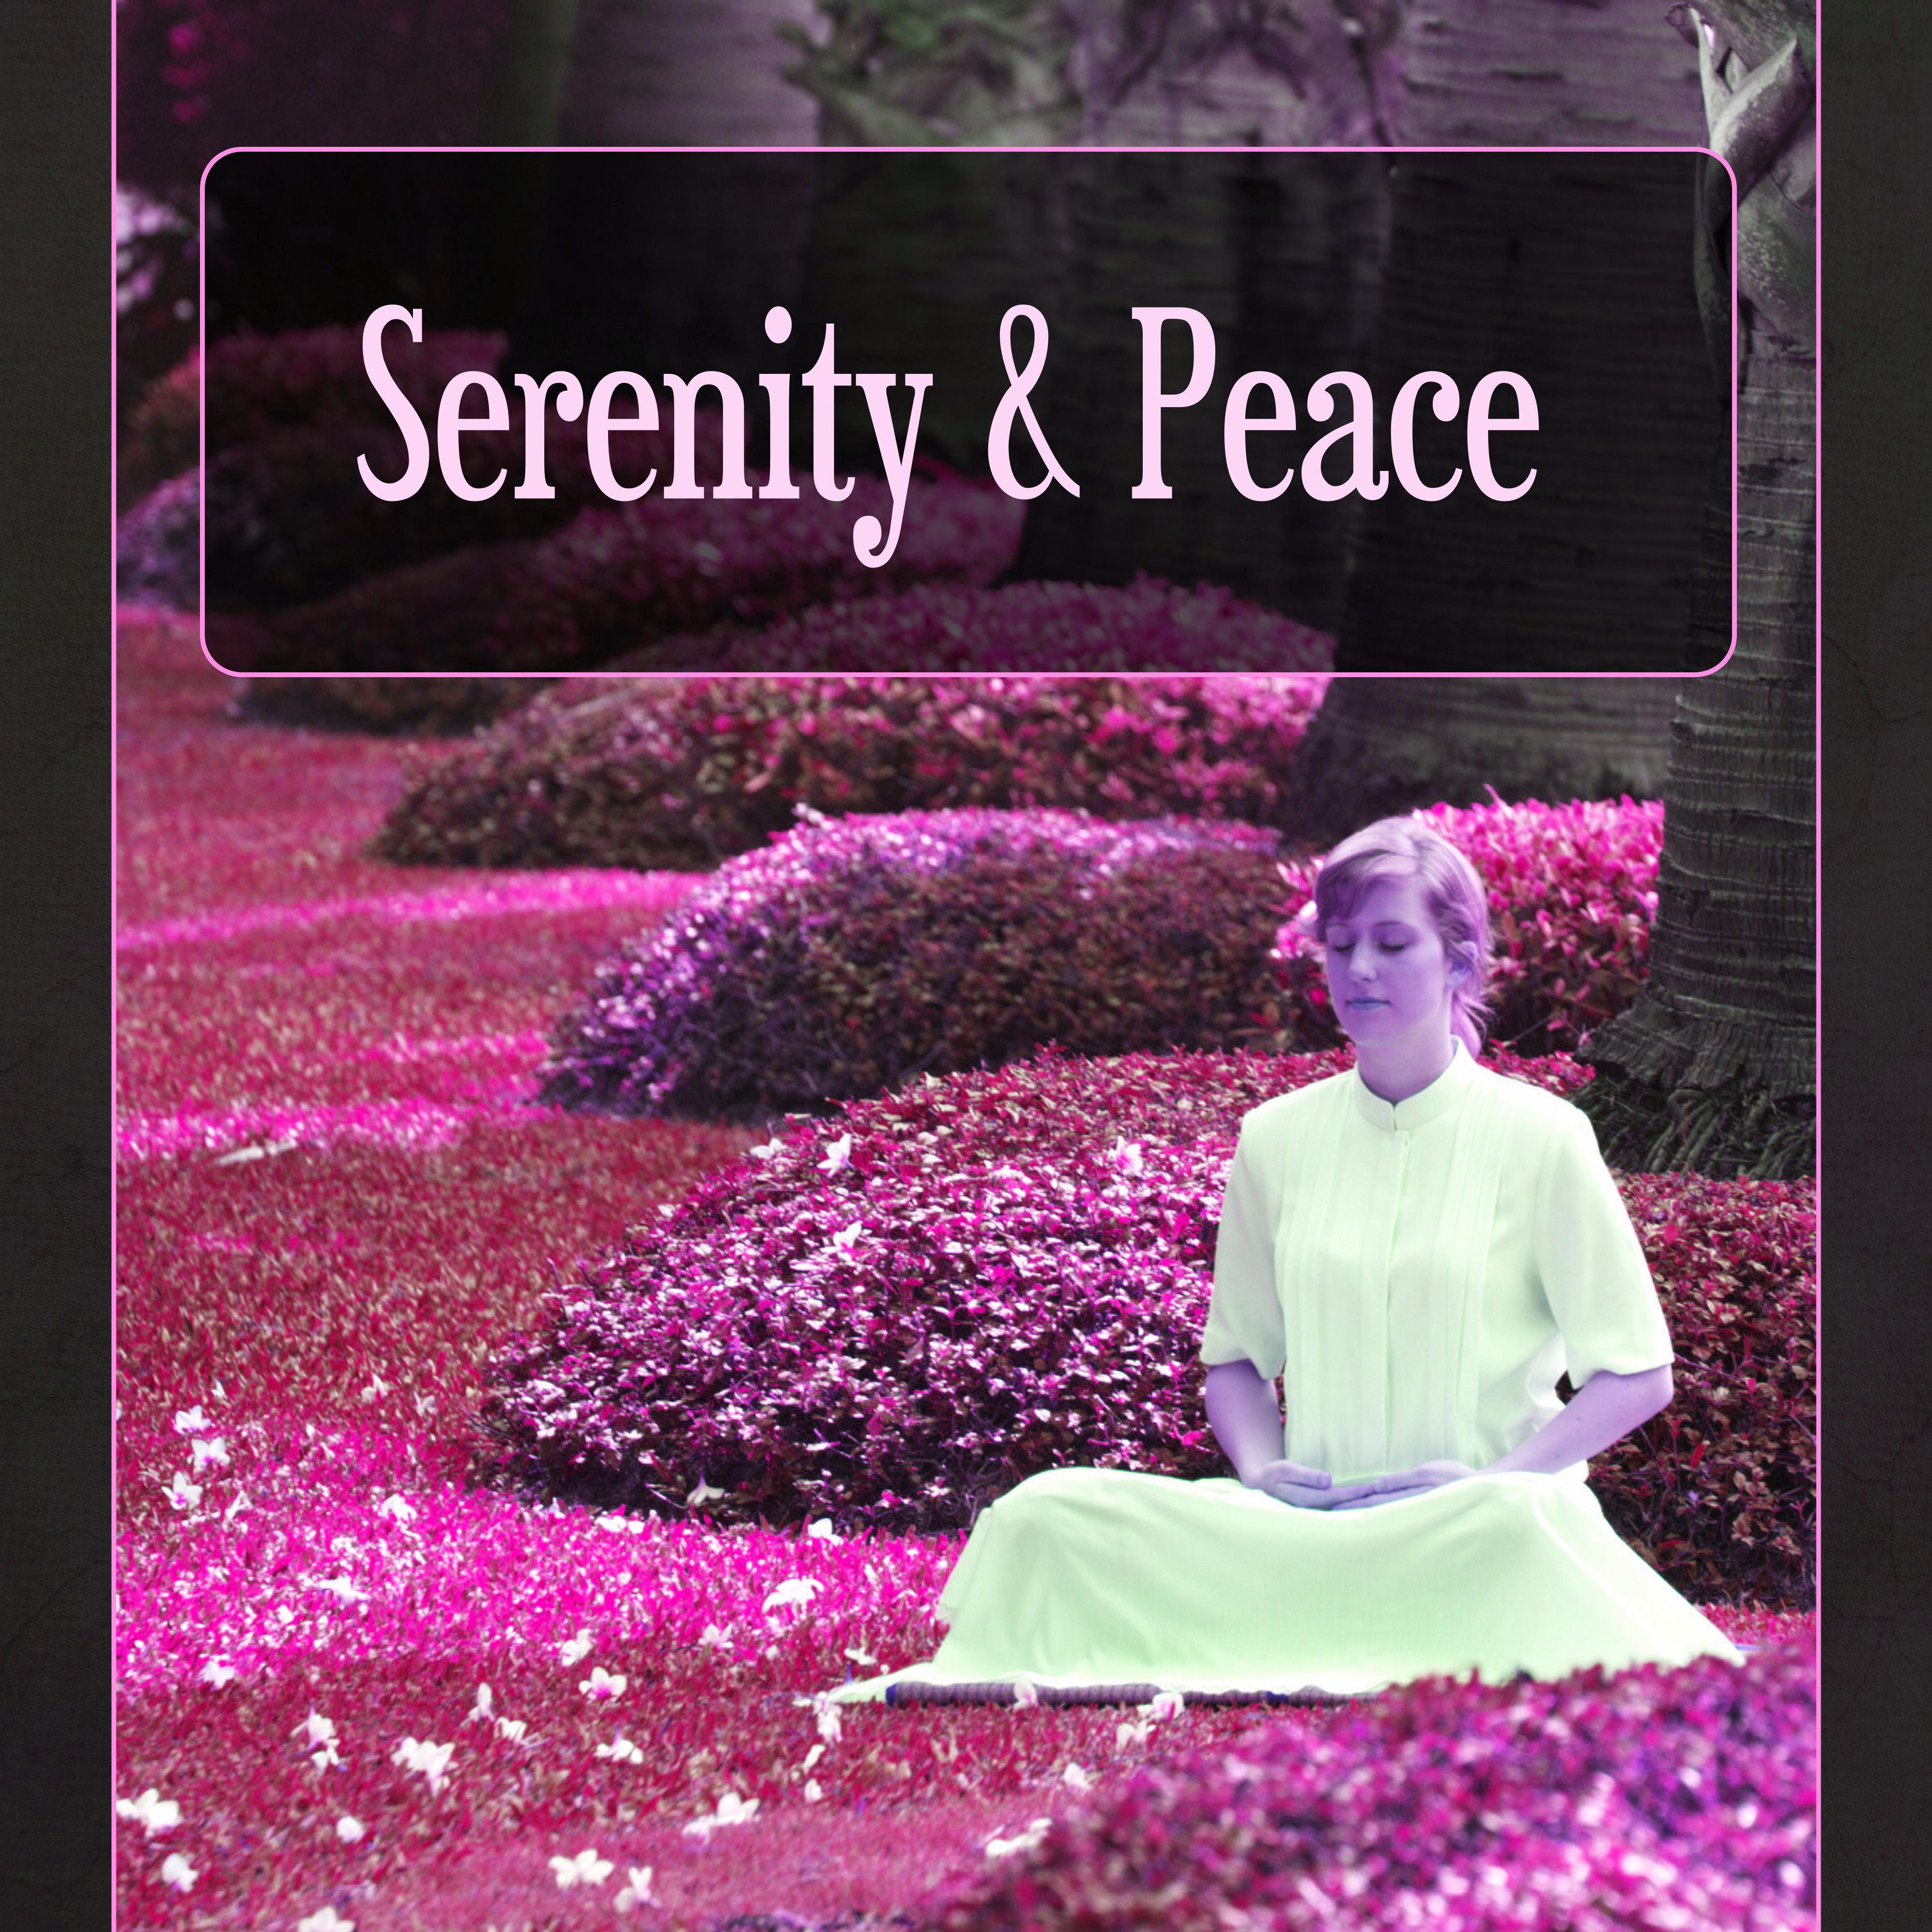 Serenity & Peace – Calm Music for Your Spirit, Asian Zen Spa and Massage, Natural White Noise, Sounds of Nature